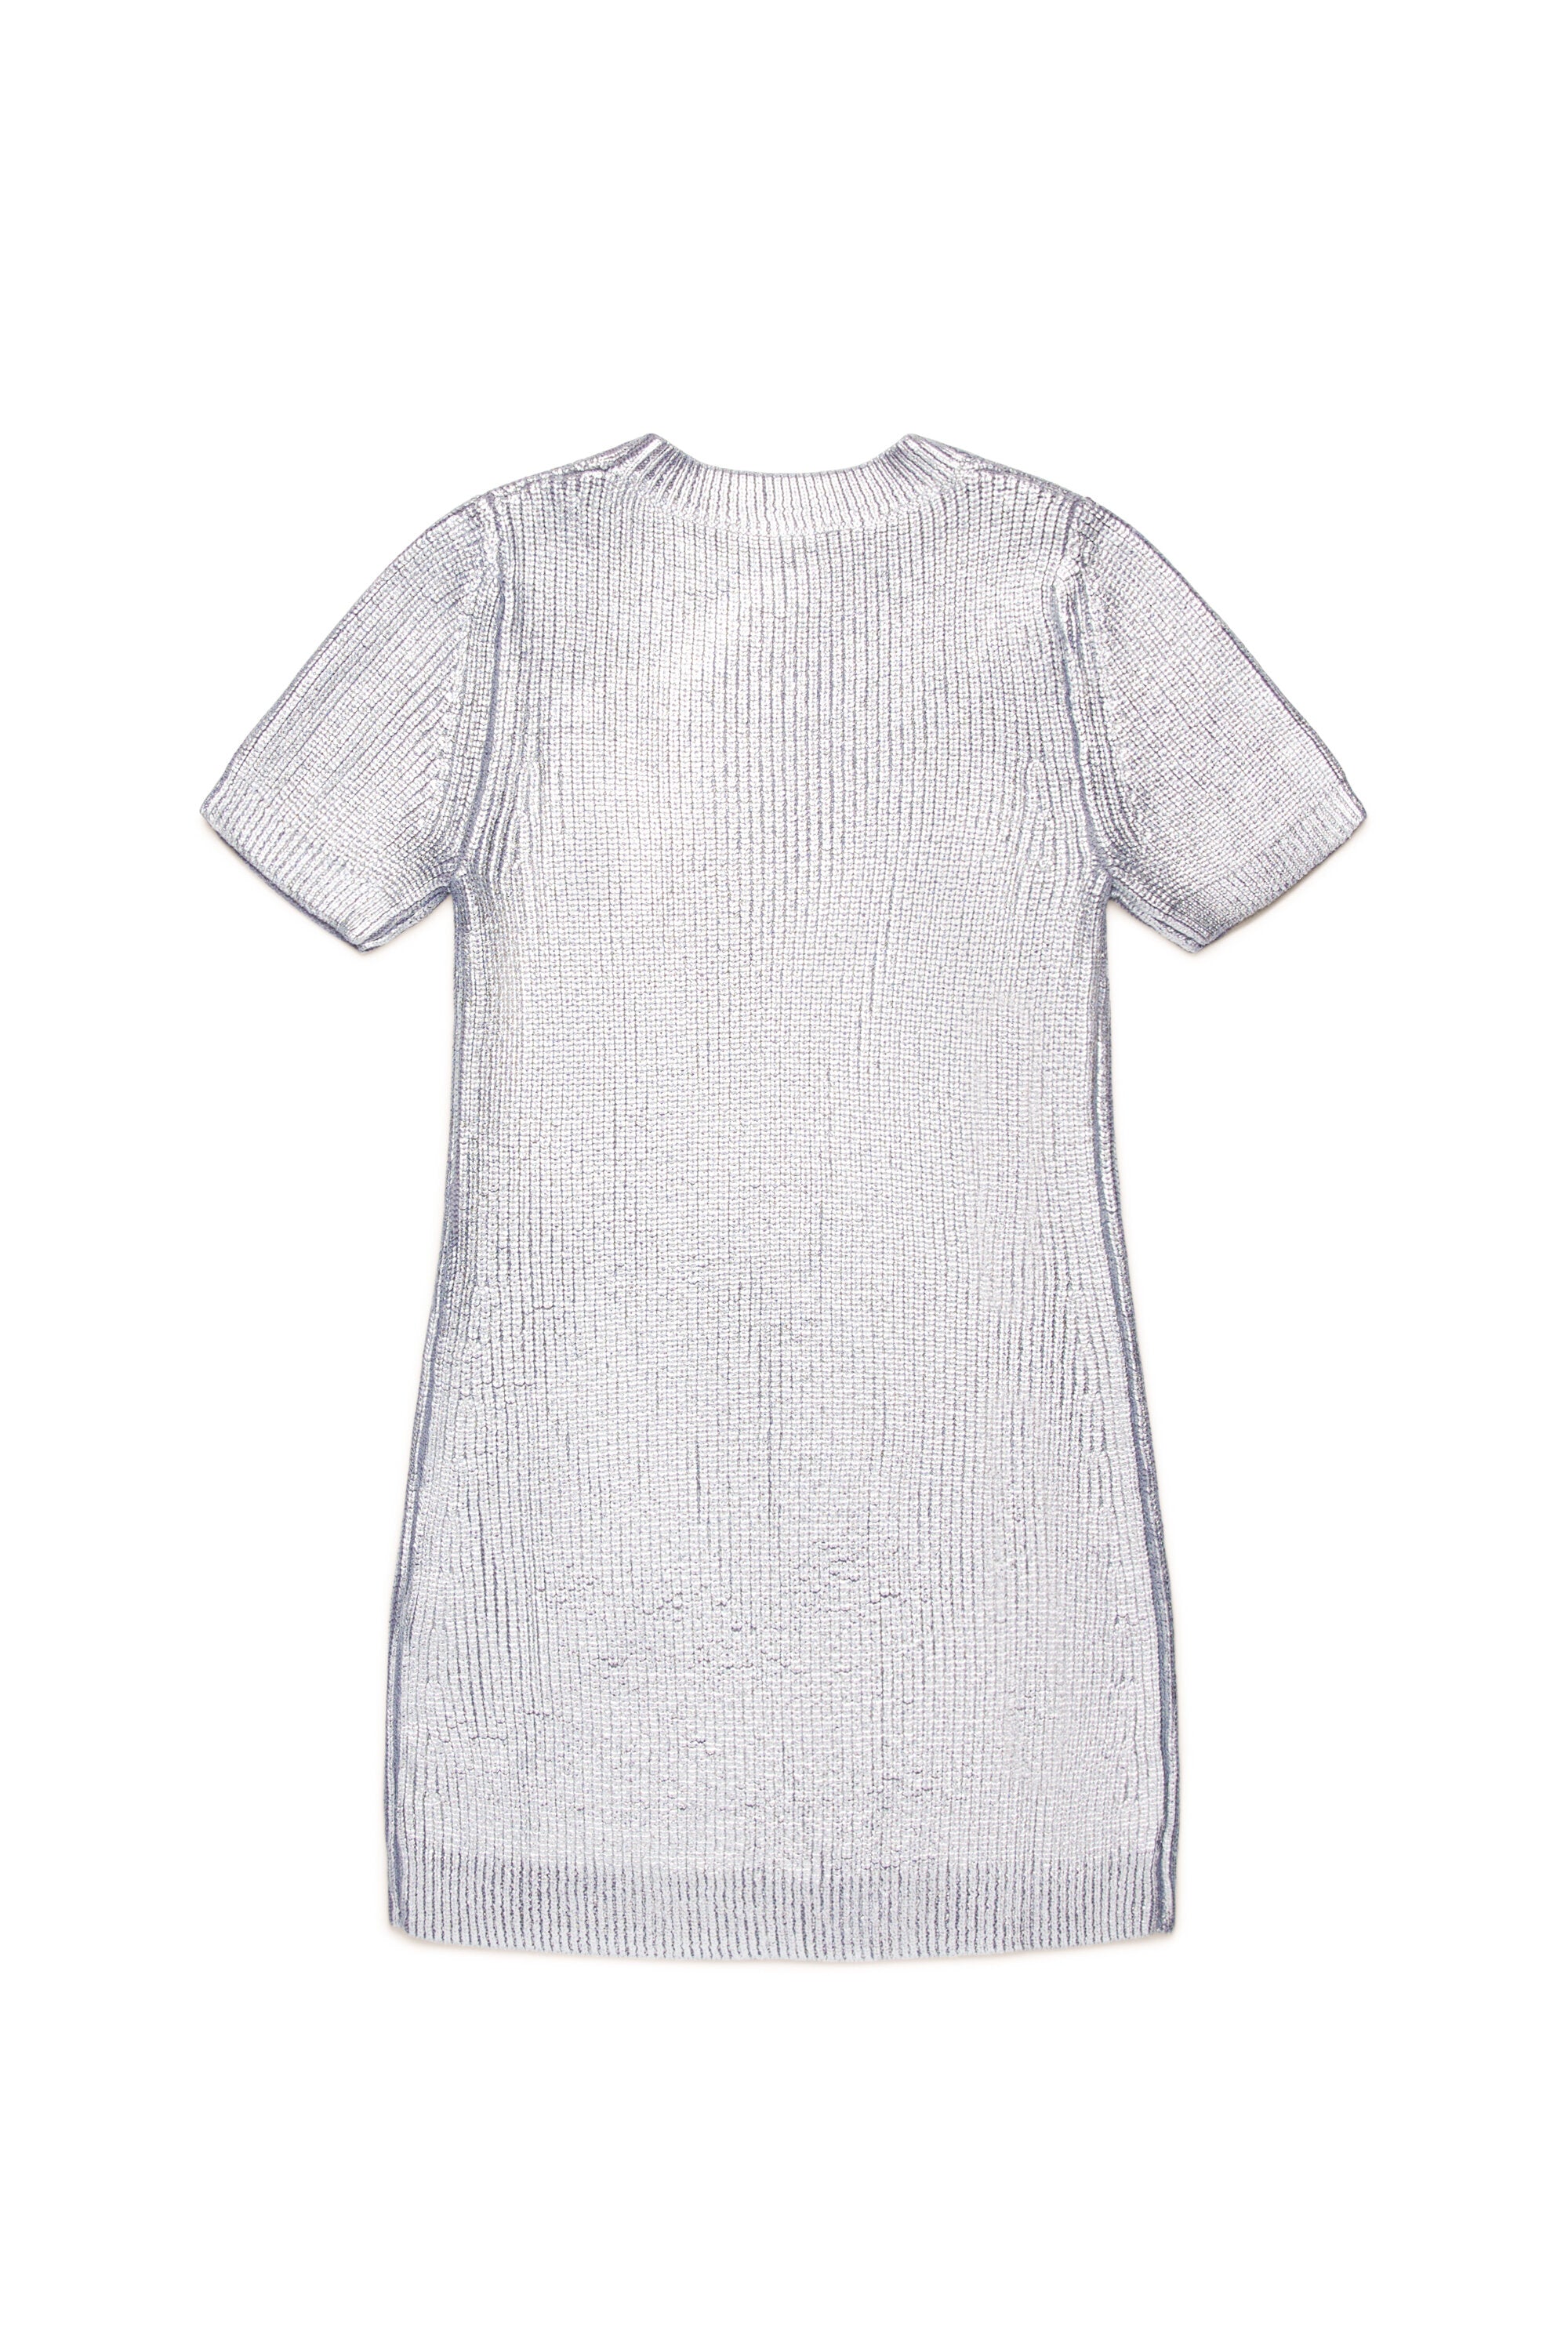 All-over silver mylar ribbed dress